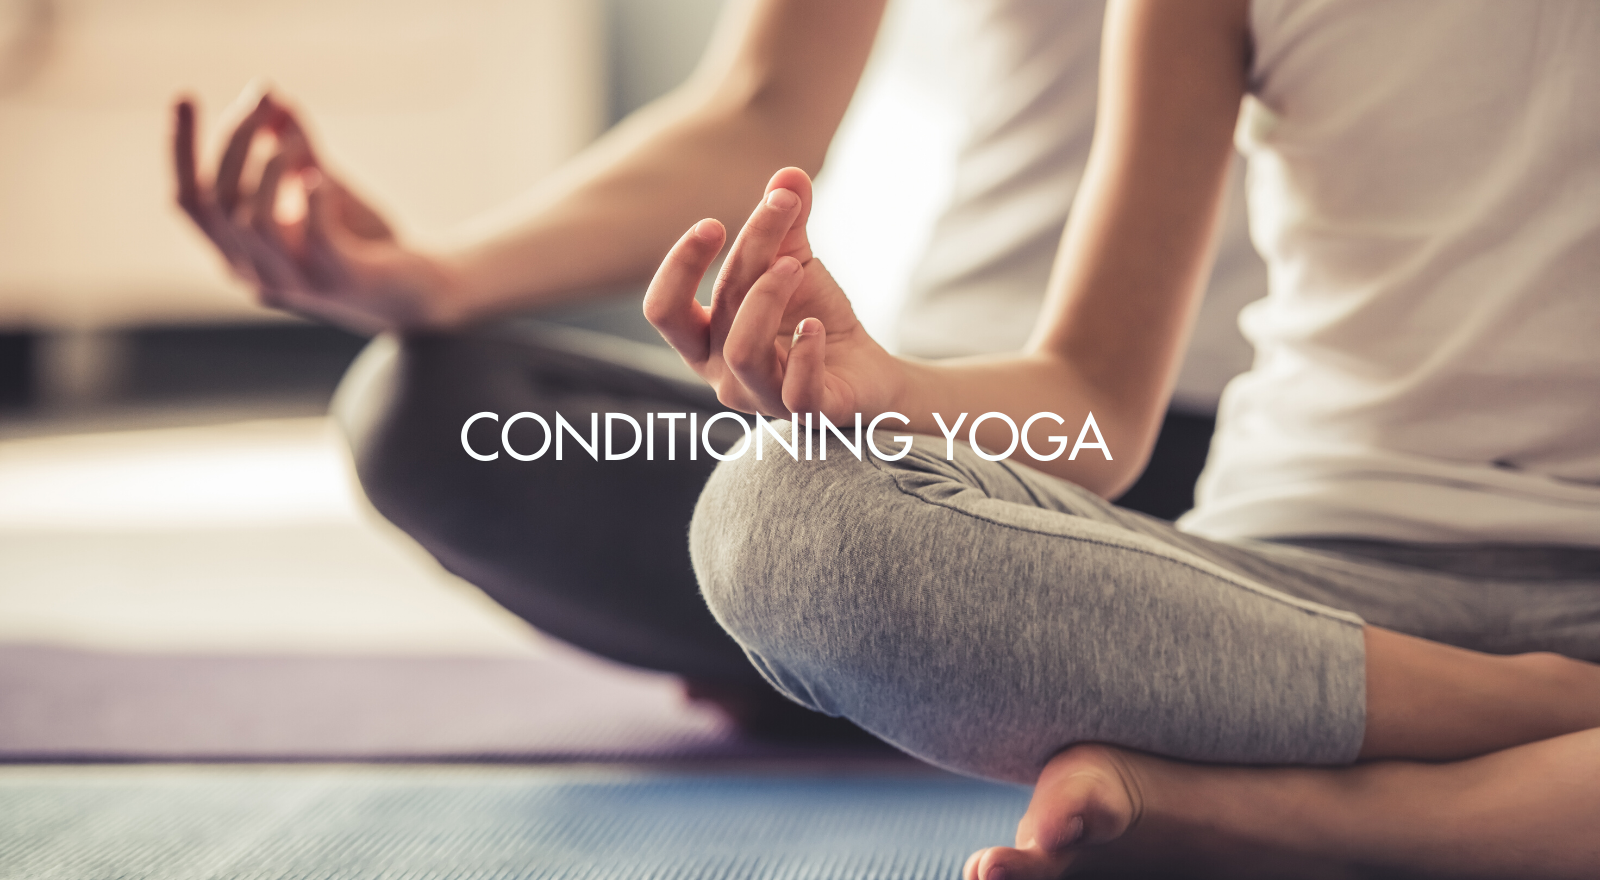 yoga, conditioning yoga, exeter golf and country club, yoga exeter, howard pike yoga